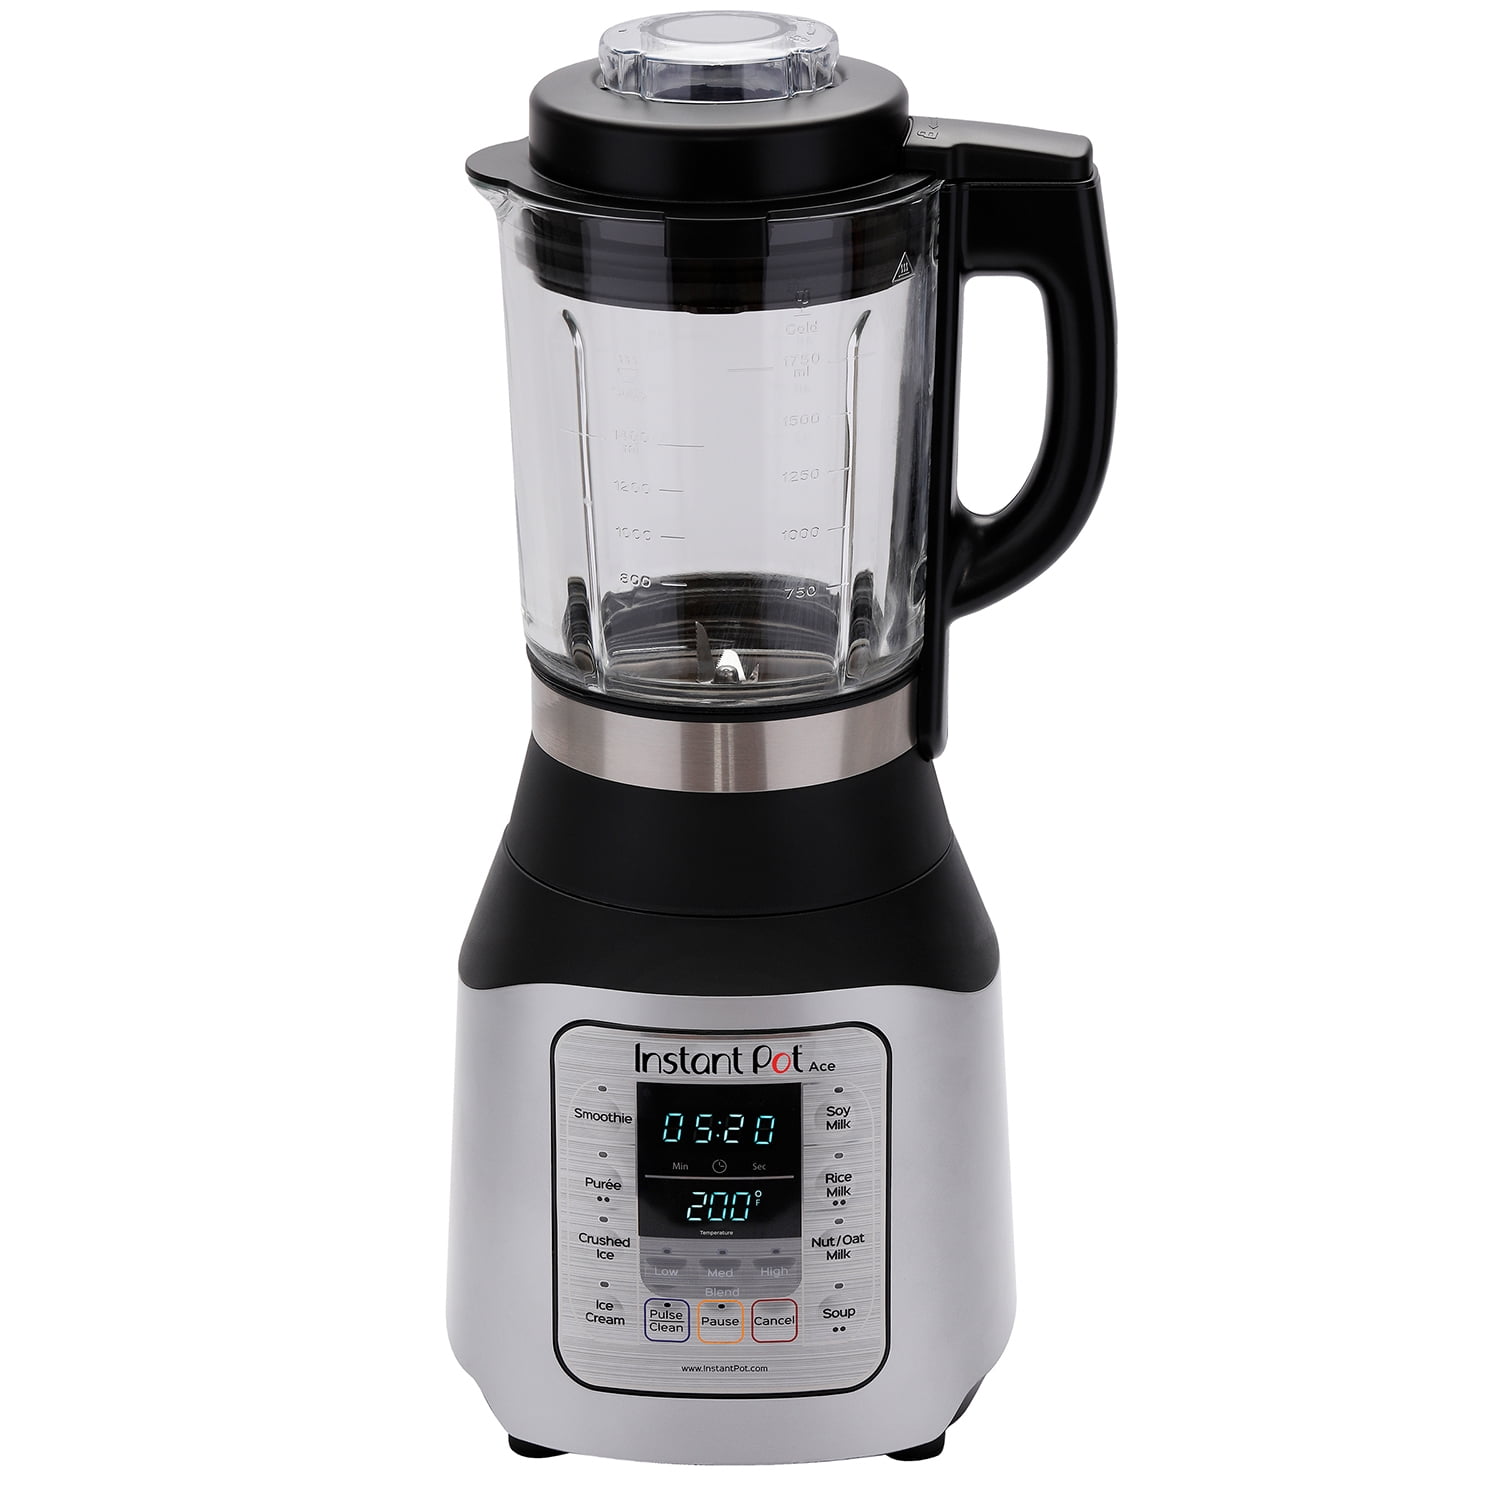 The Instant Pot Ace Plus 10-in-1 blender is on sale at Macy's